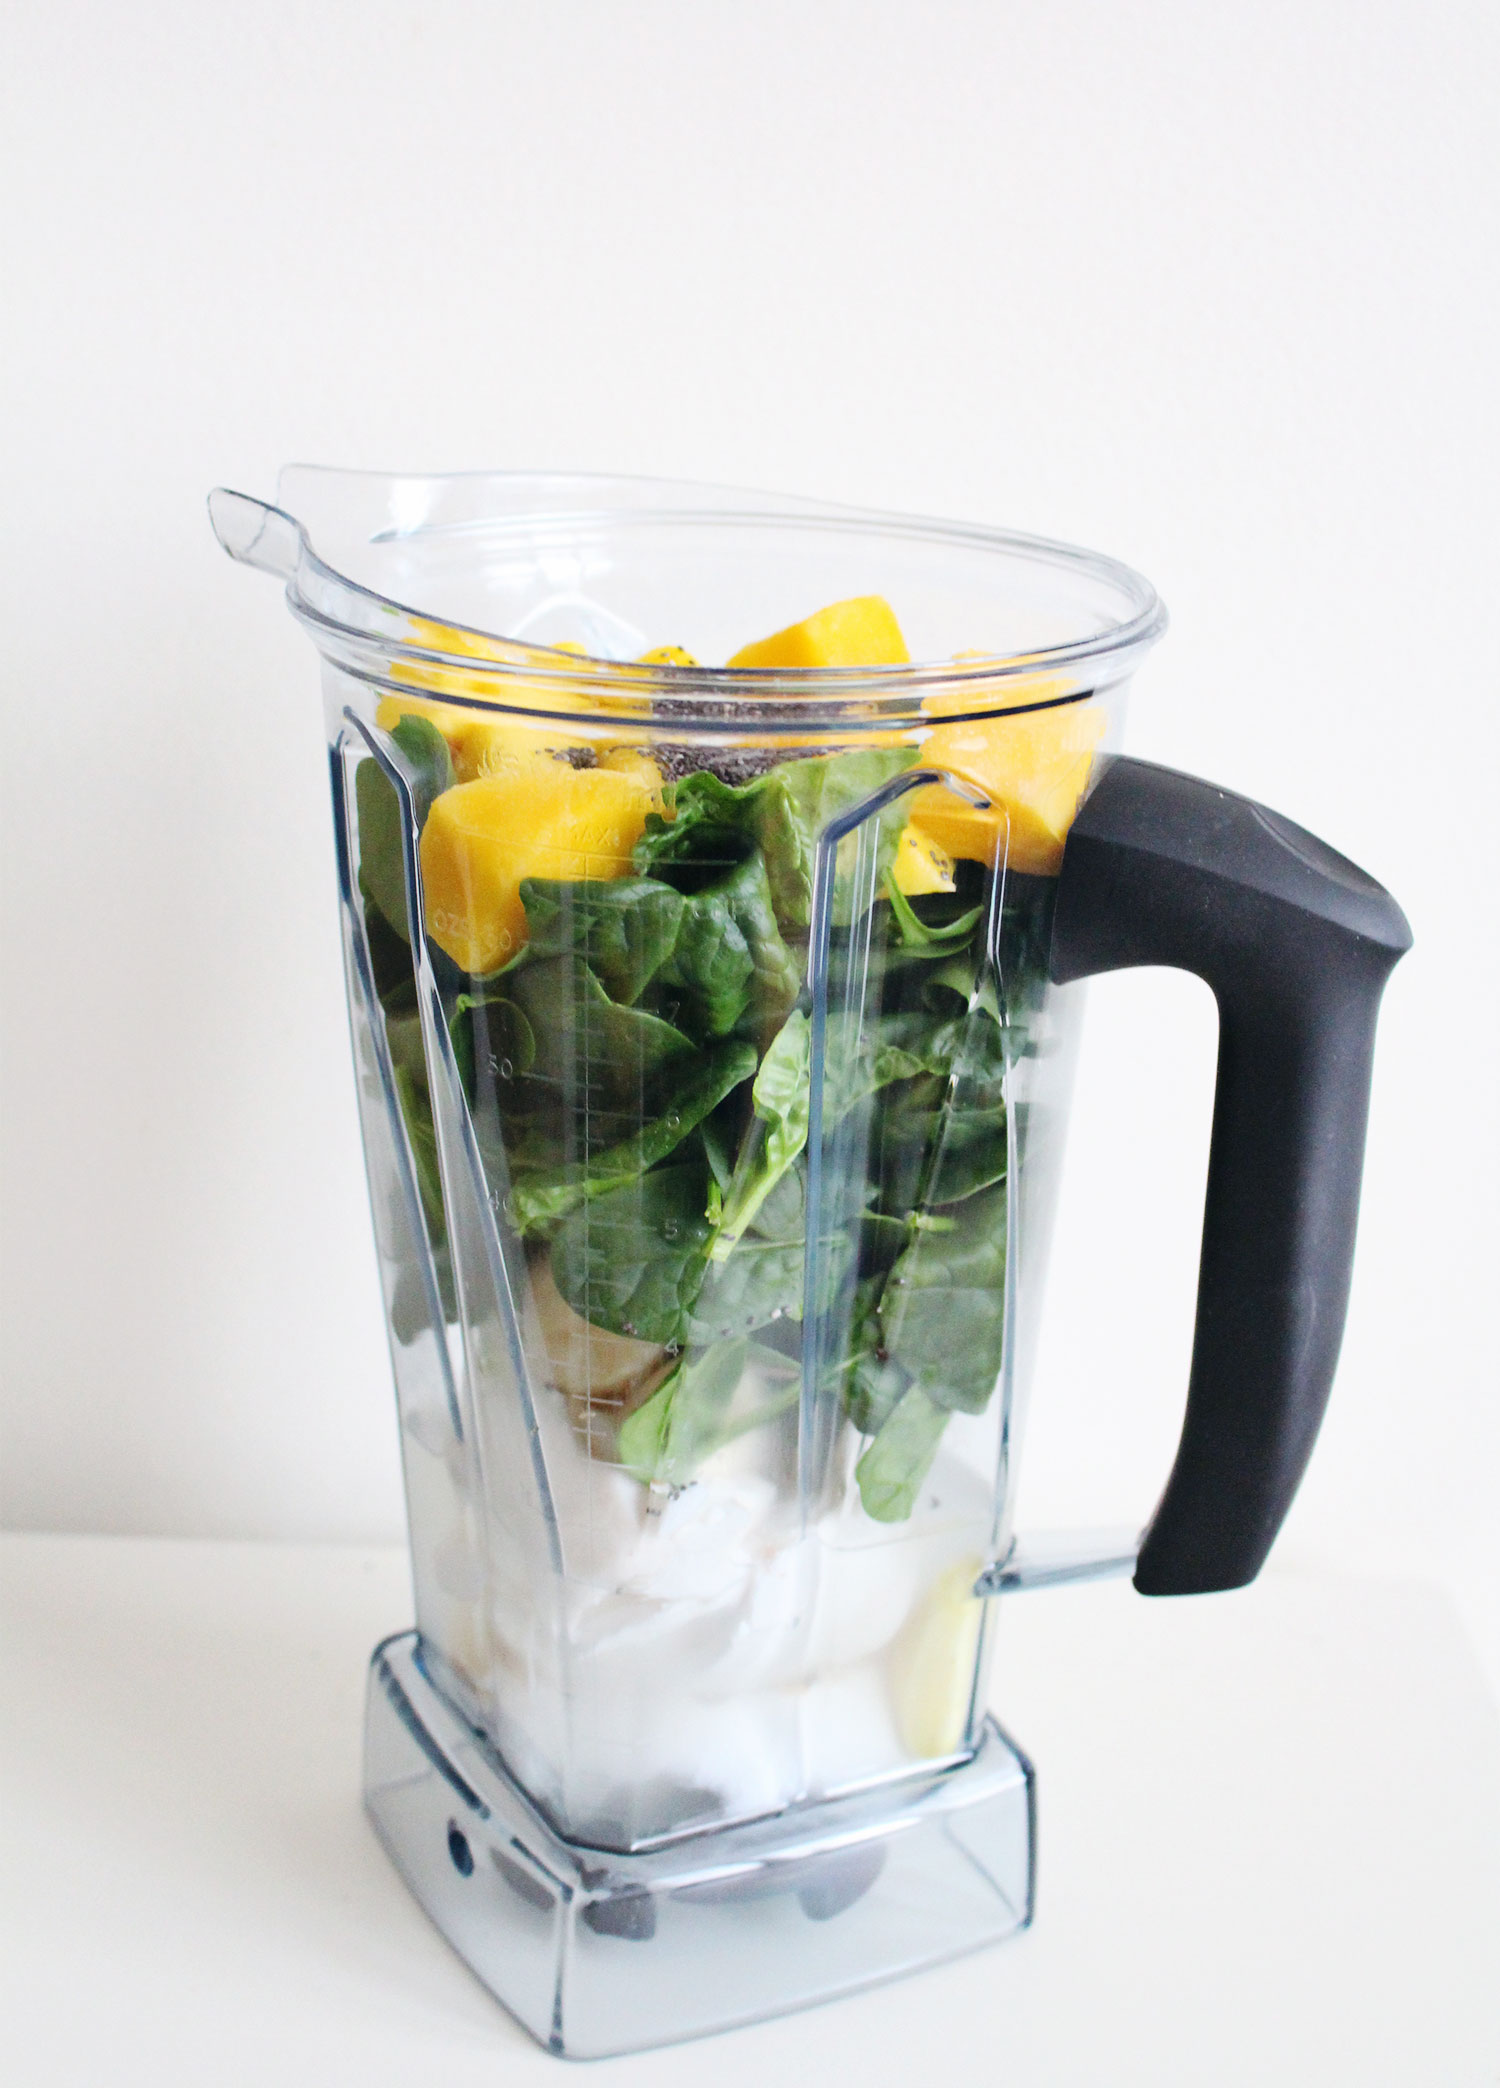 A healthy and delicious green smoothie recipe to feel energized in the mornings on Lily & Val Living